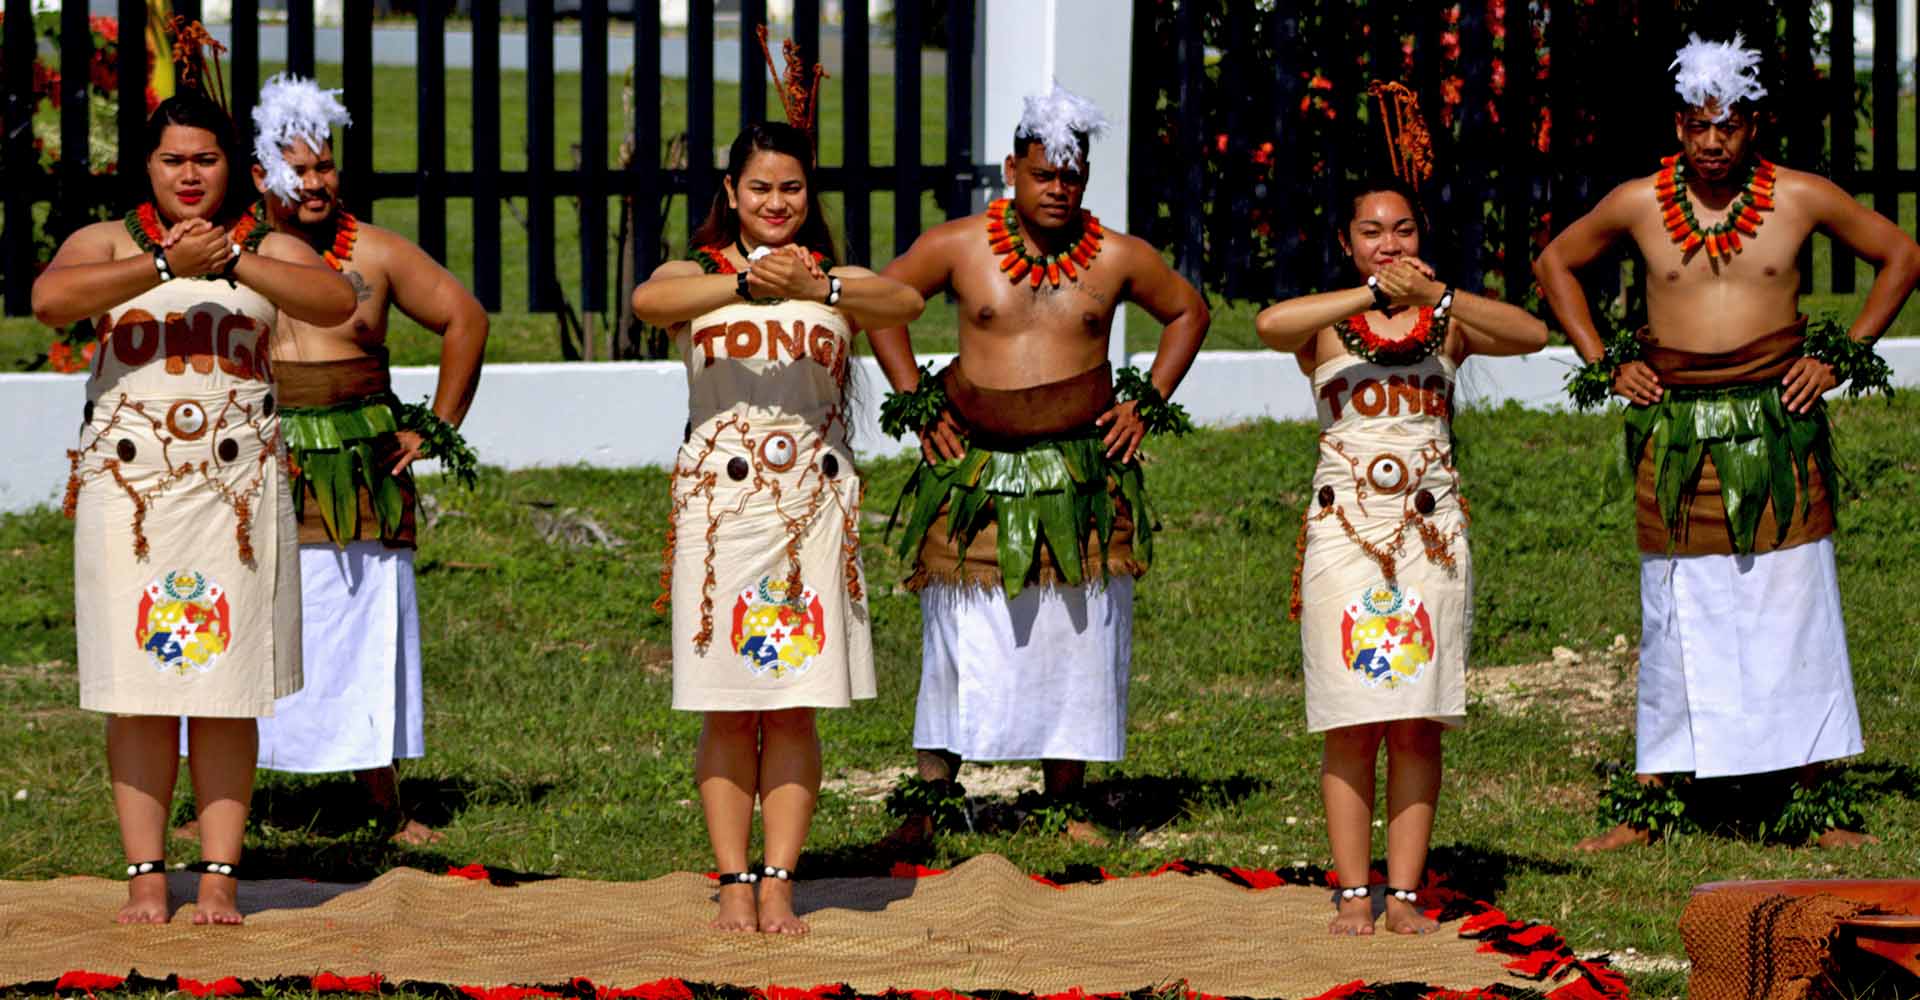 Tonga Culture and Tradition